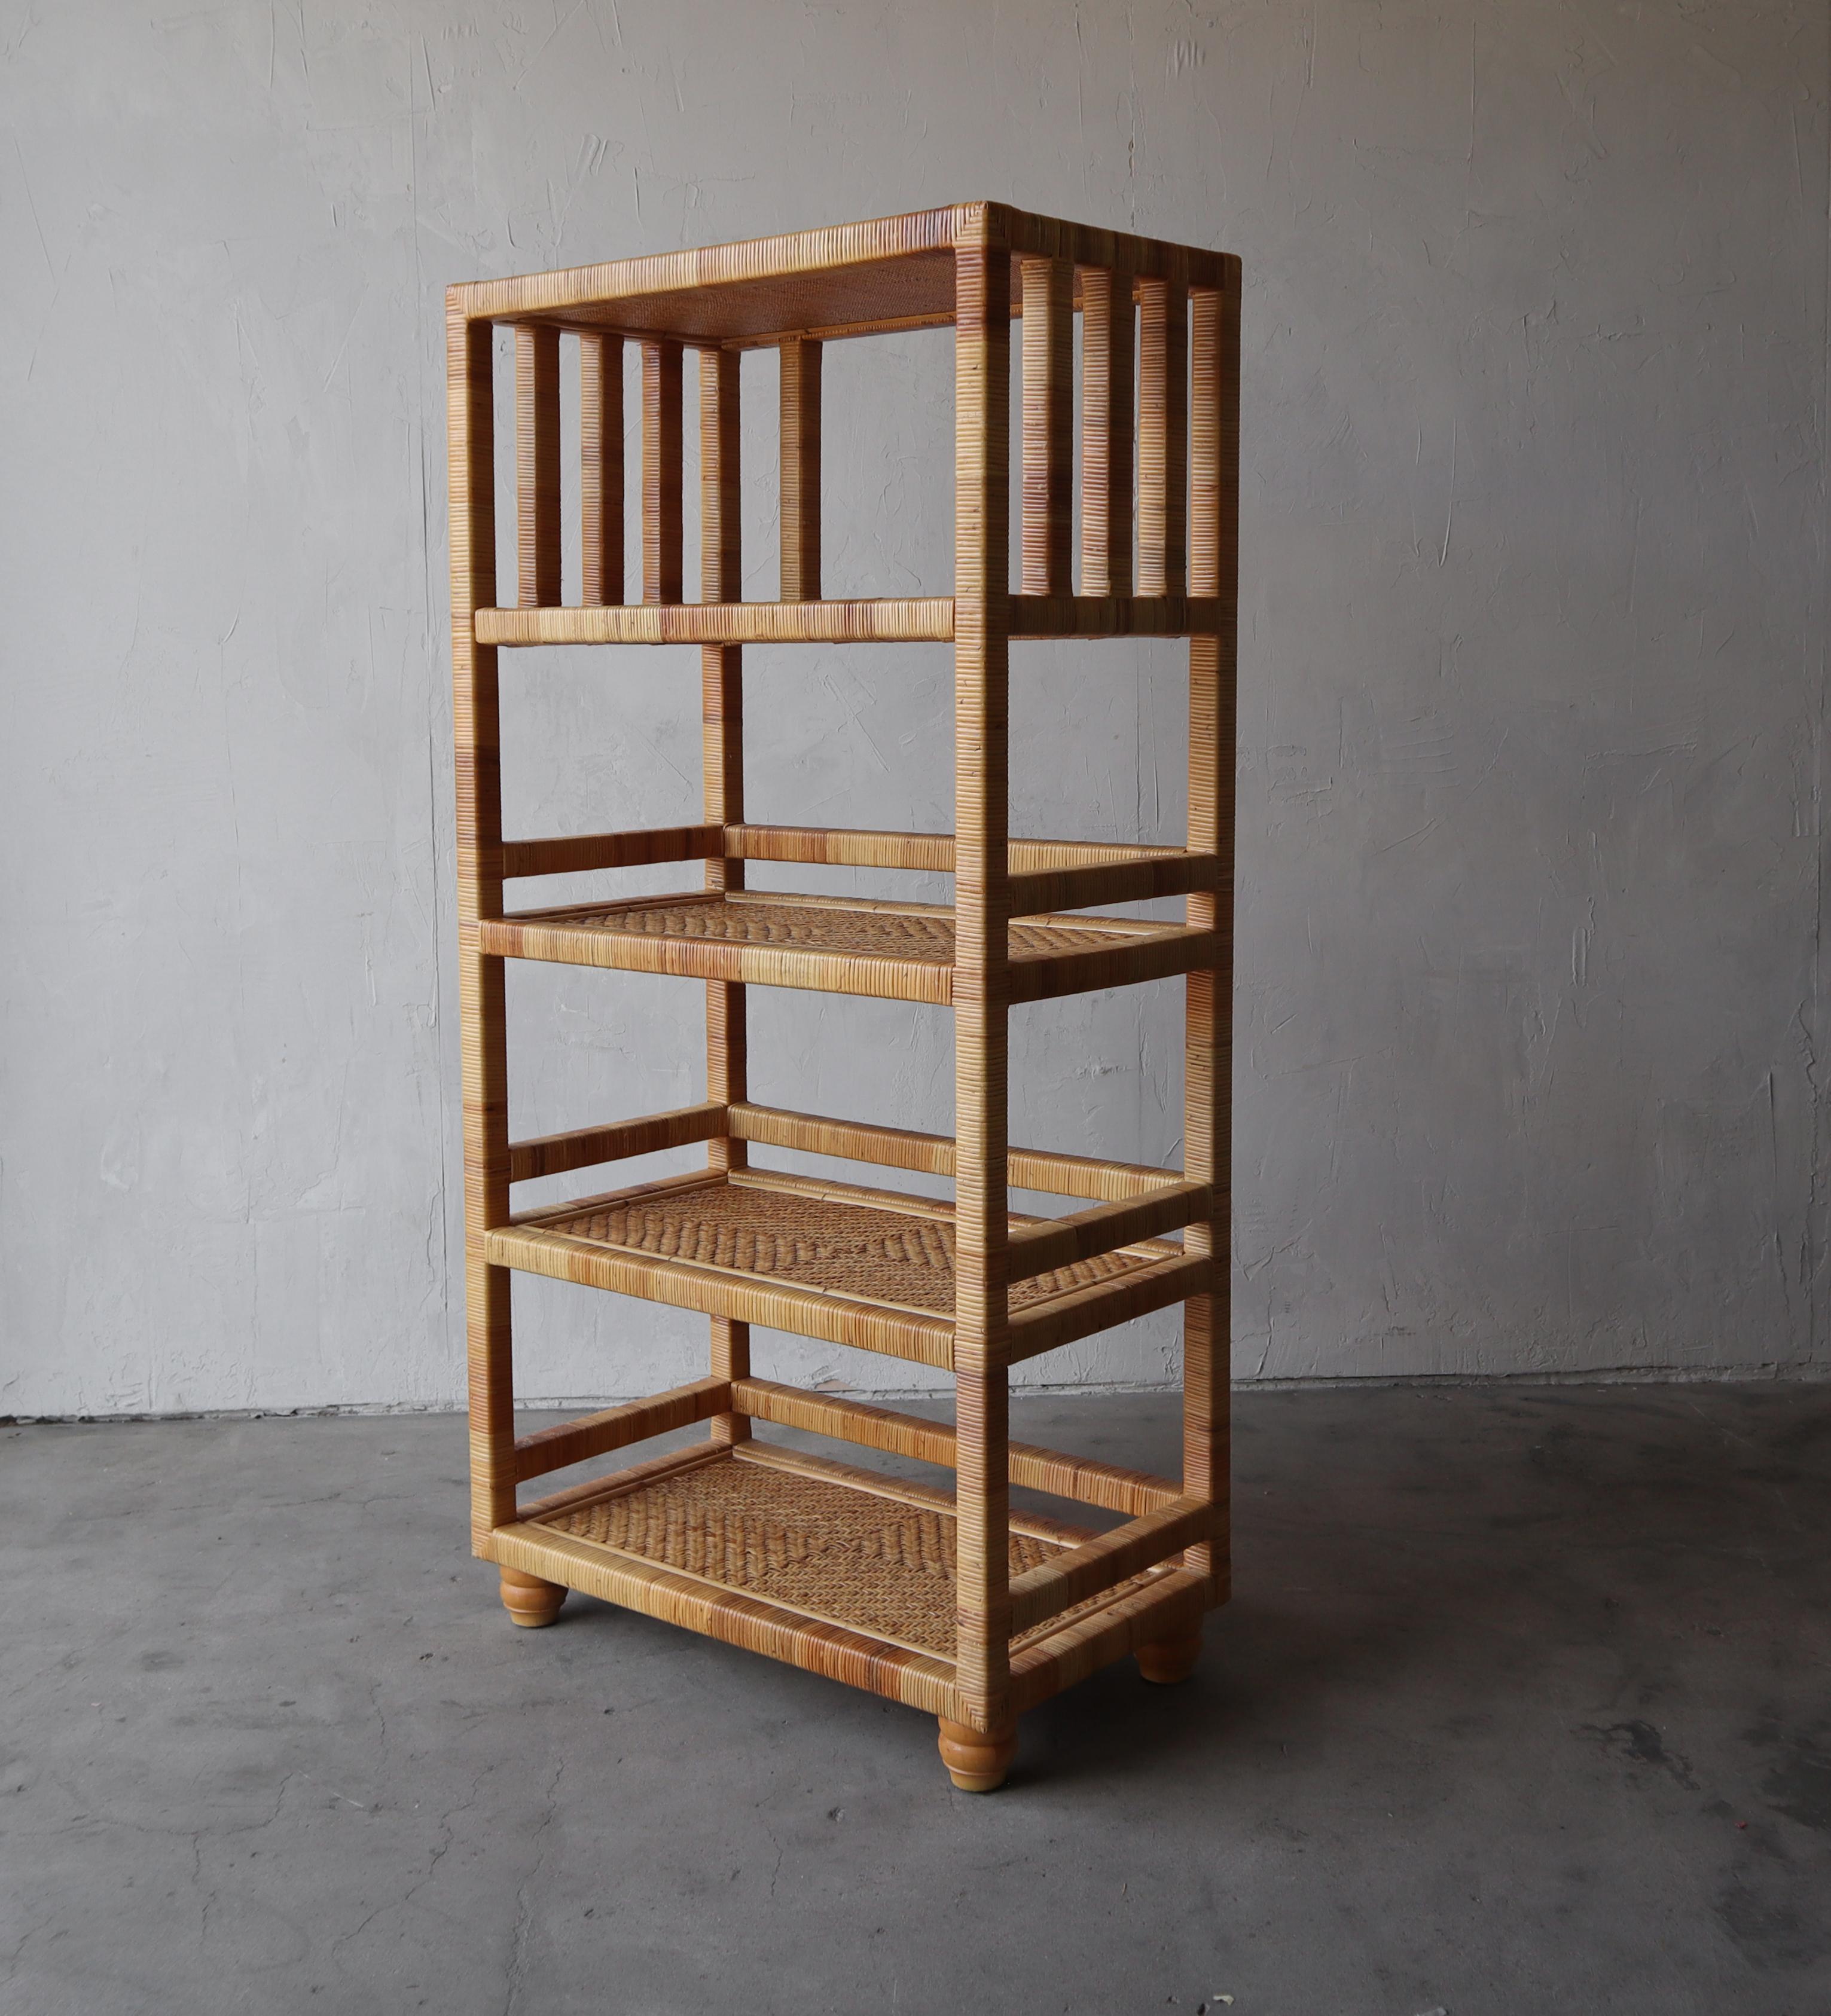 Great vintage vintage bookshelf in pristine condition. Unlike a lot of wicker pieces this bookshelf is very high quality and very well made, its actually quite heavy. Each shelf is reinforced and could actually be used for books.

There are no